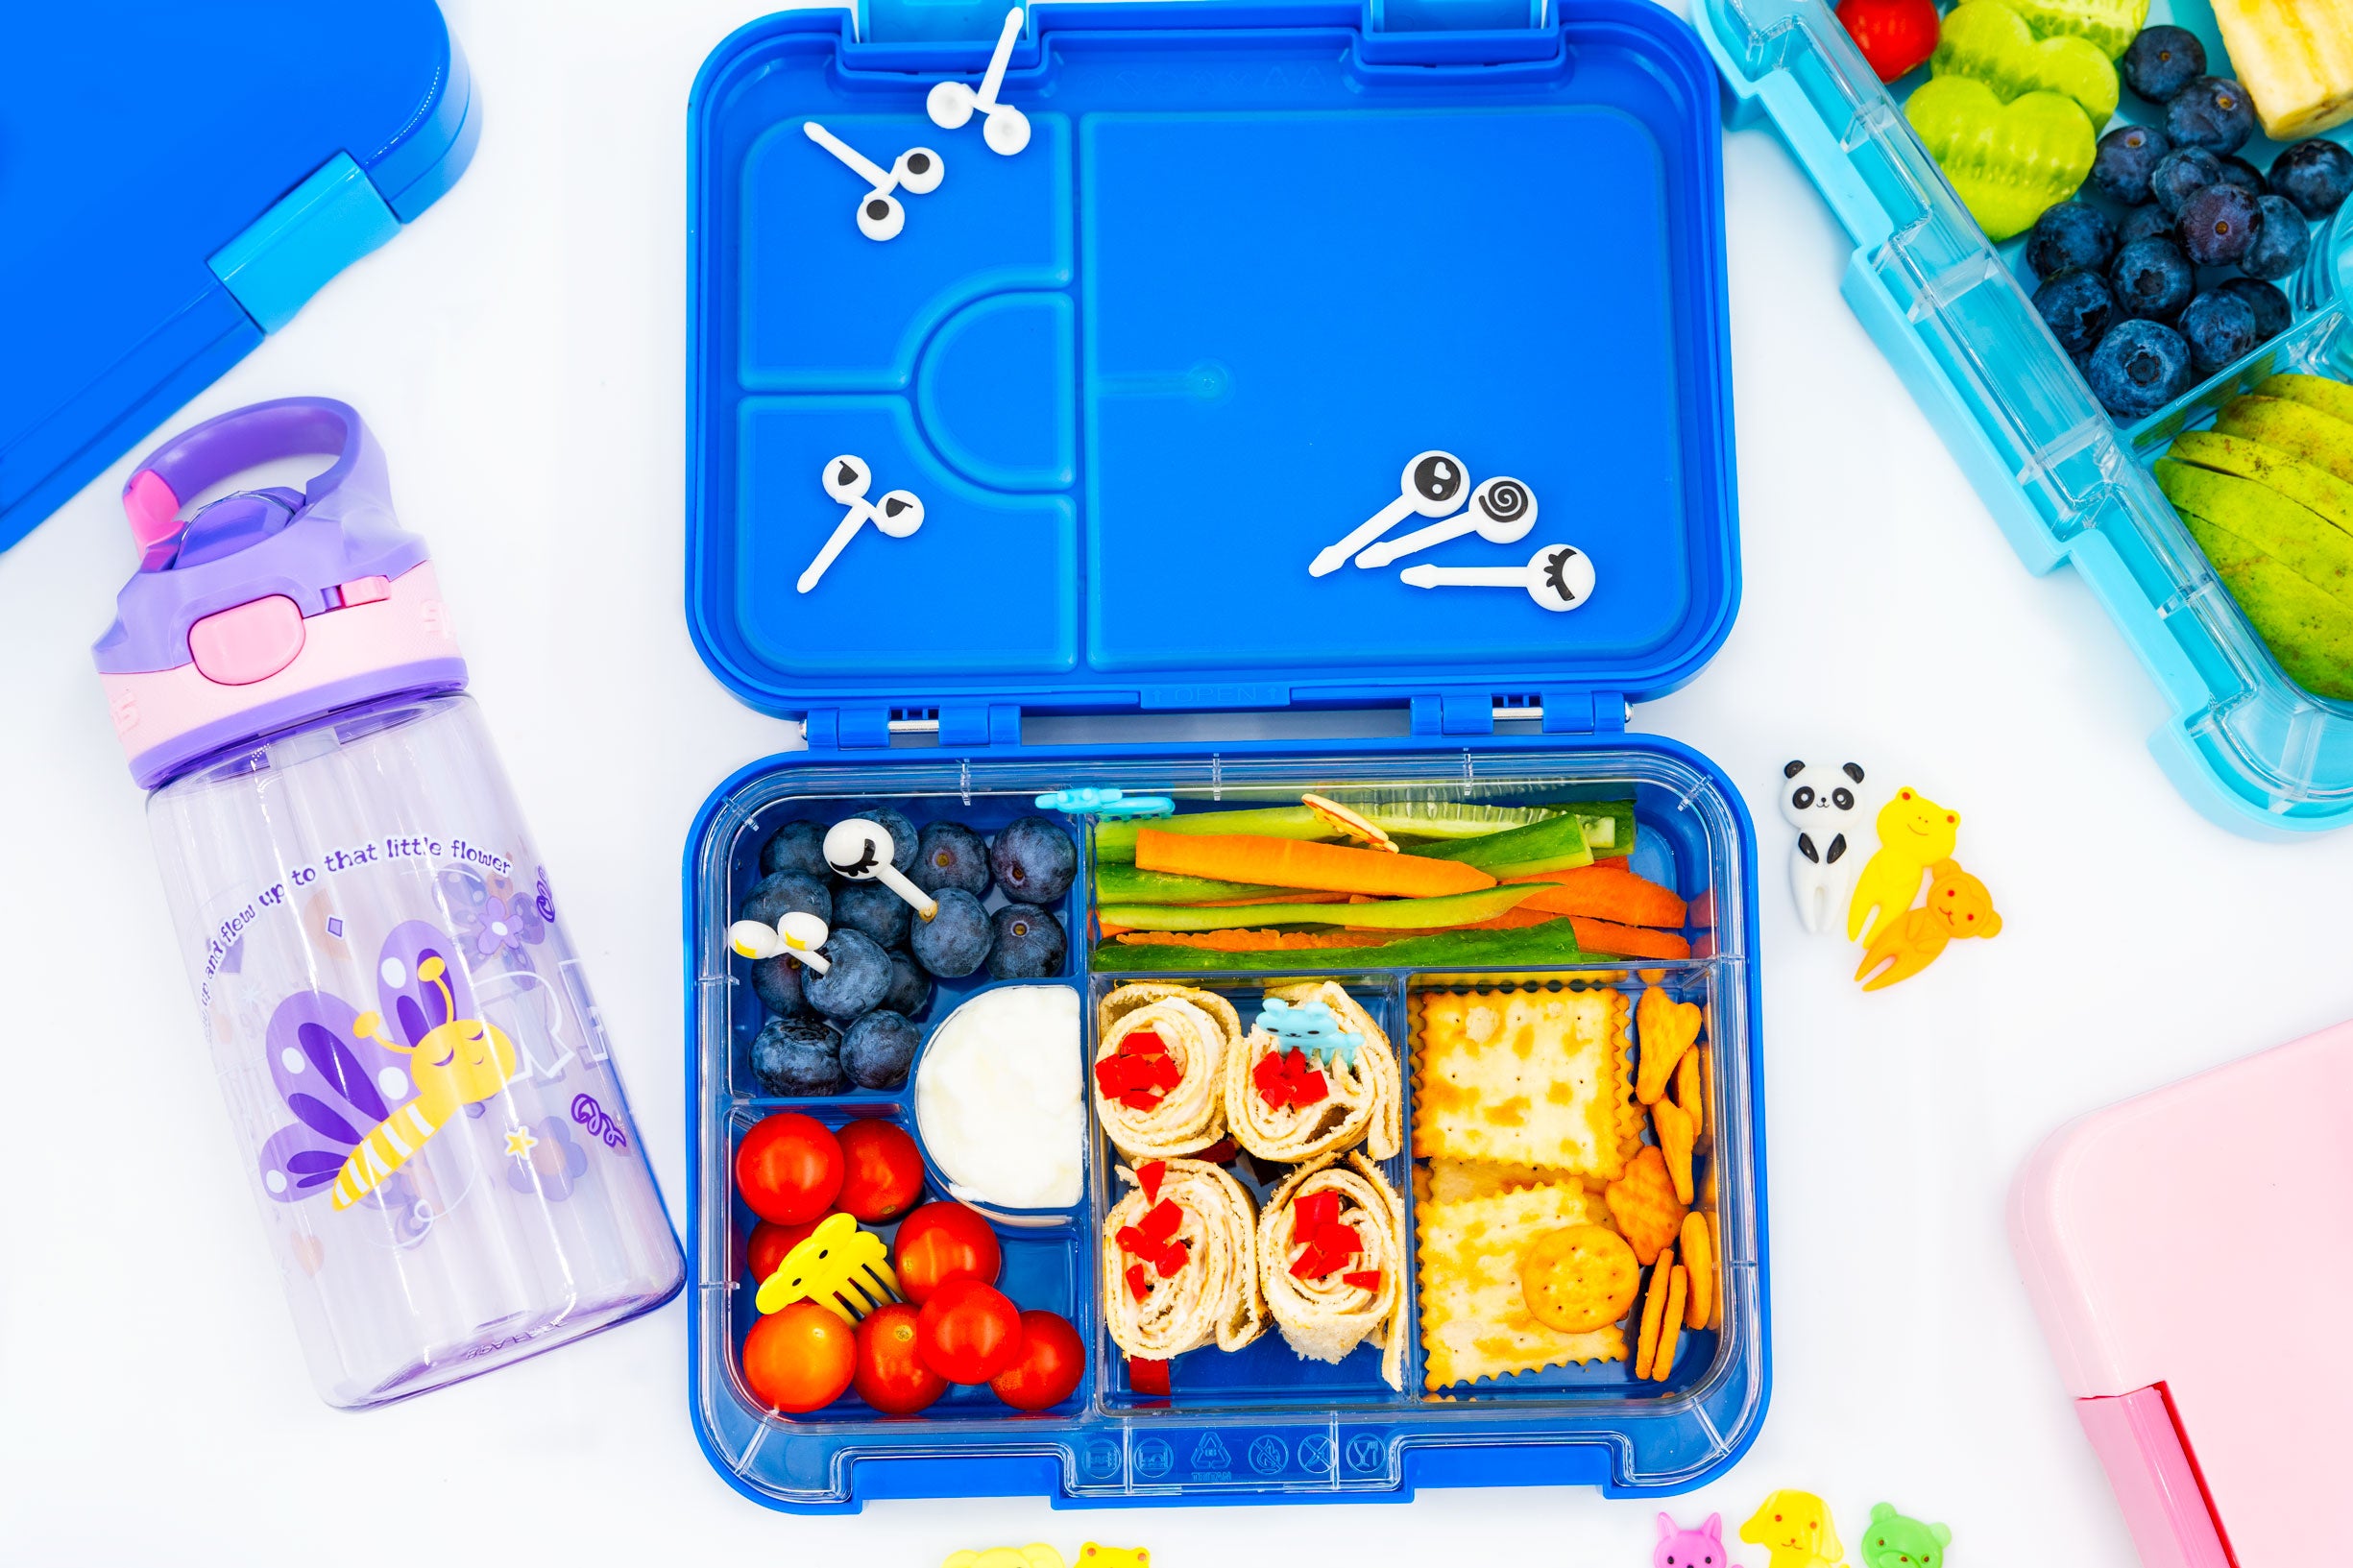 Snack Attack Lunch Box for Kids school 4/6 Convertible Compartments Ba –